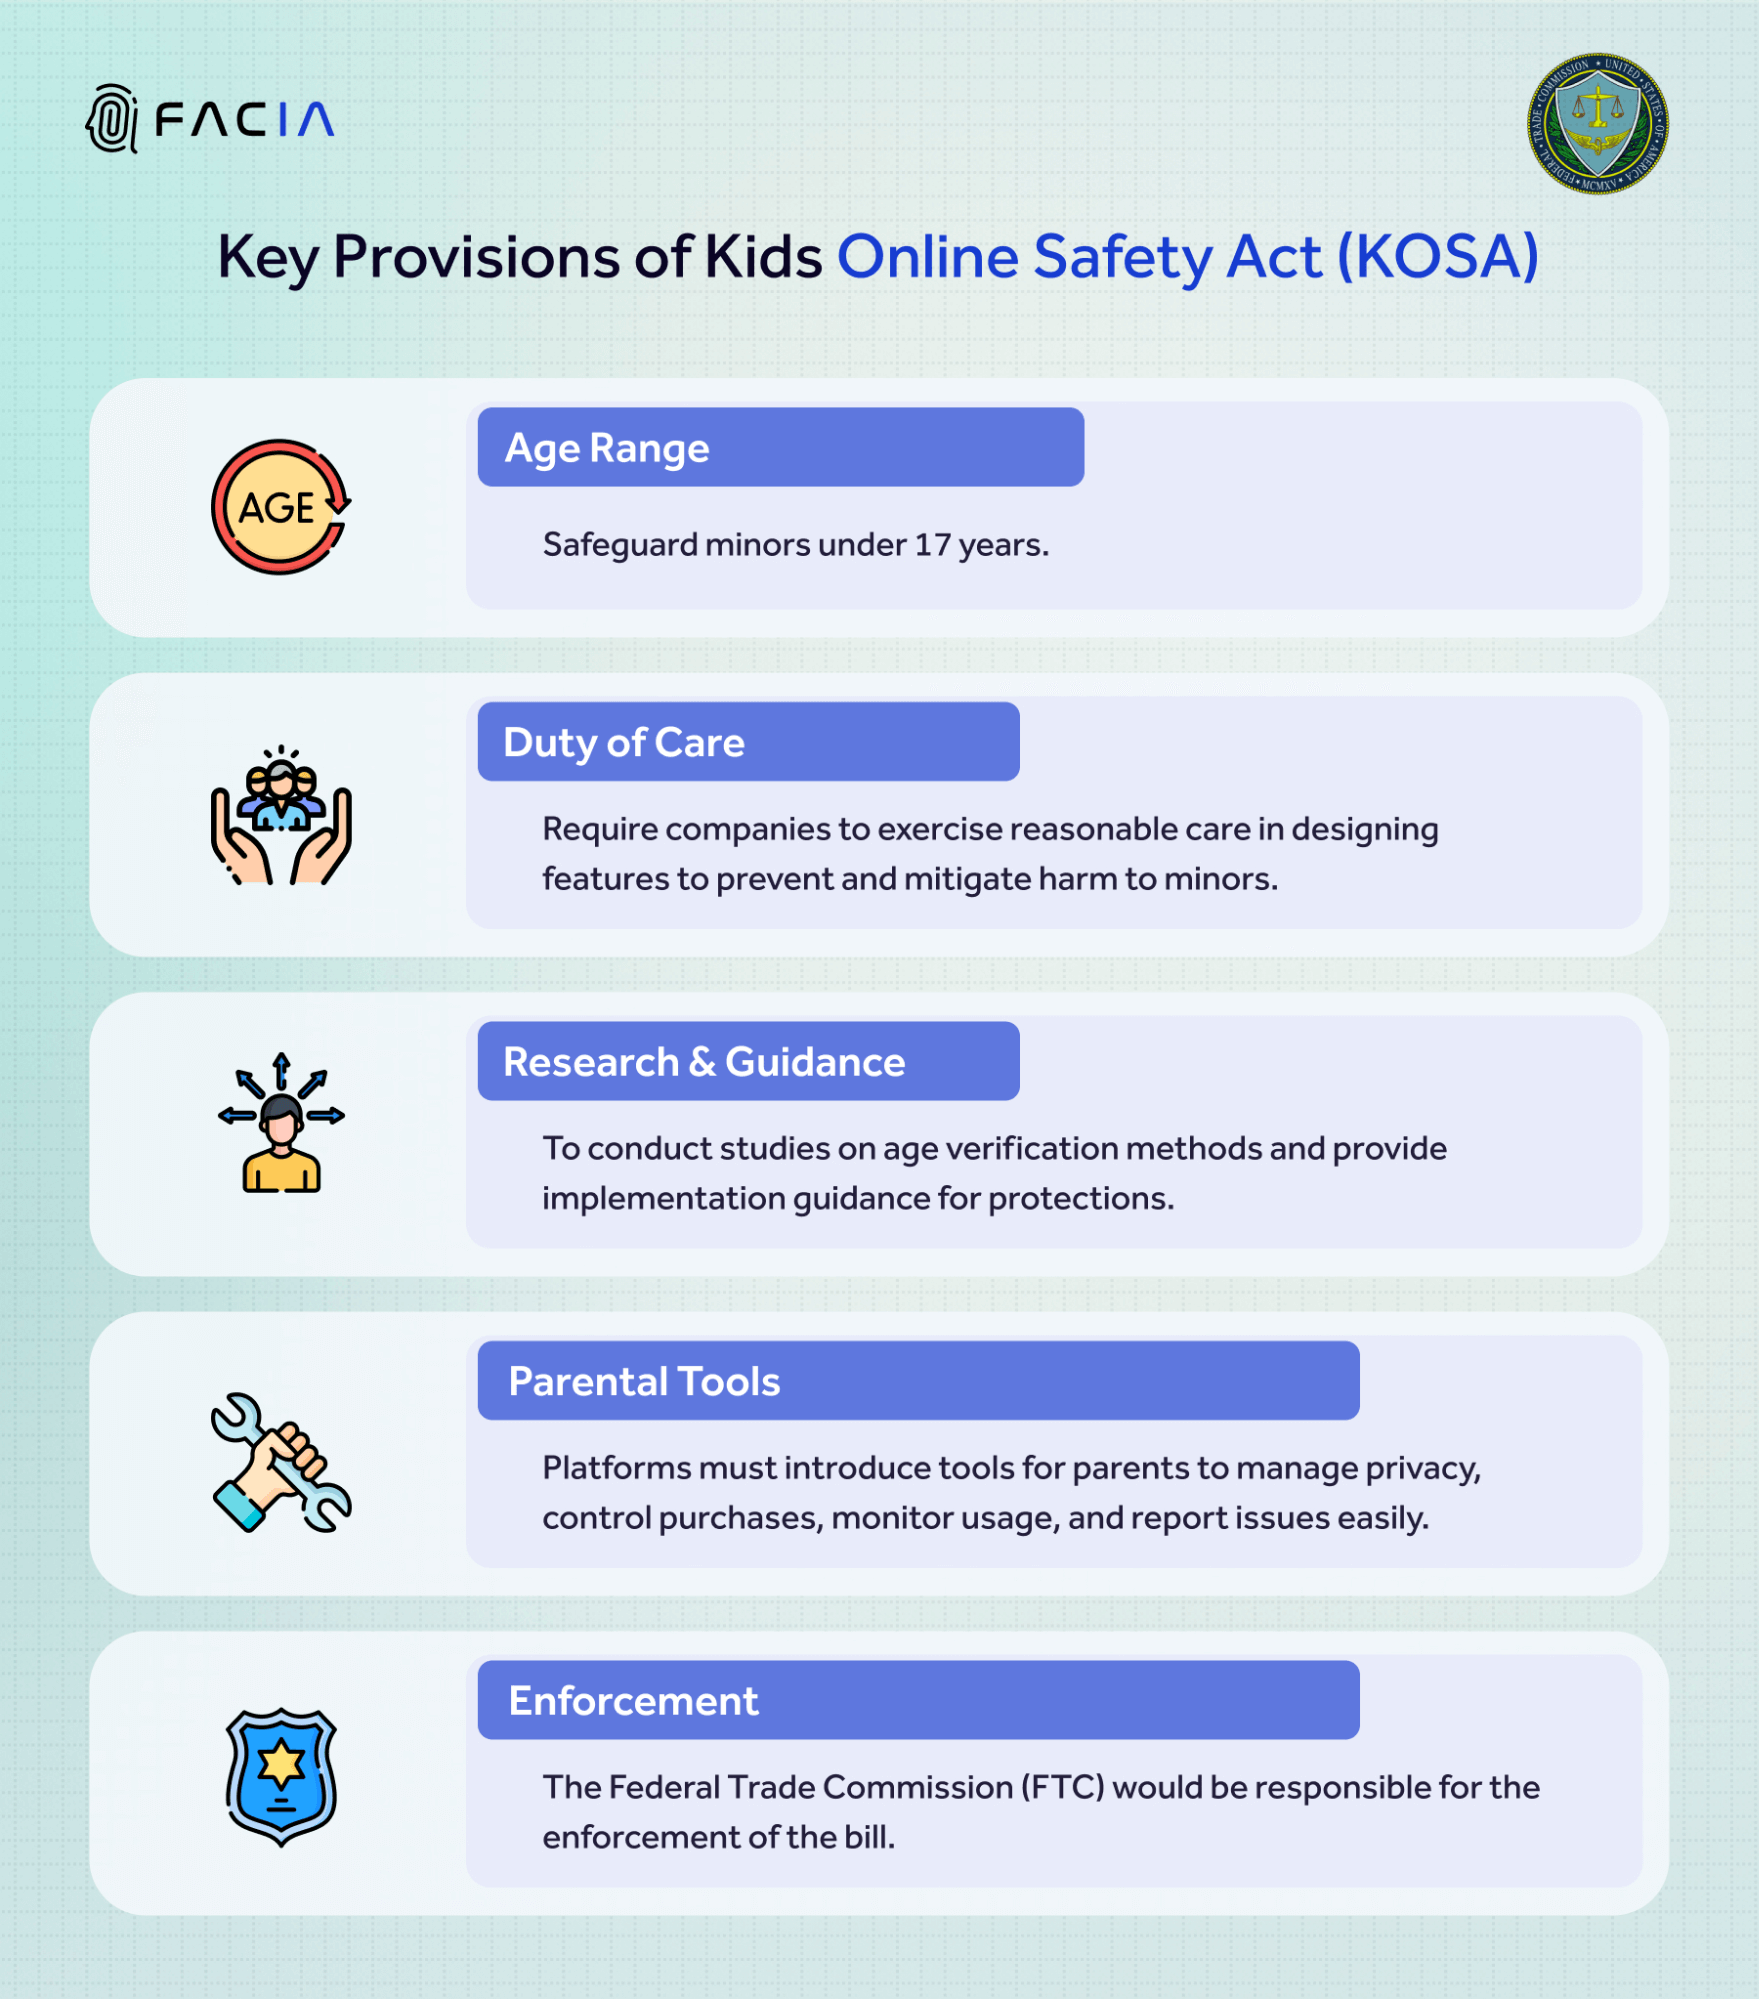 This infographic shows the key provisions of KOSA including age range, duty of care, research & guidance, parental tools, and regulatory authority responsible for enforcement.